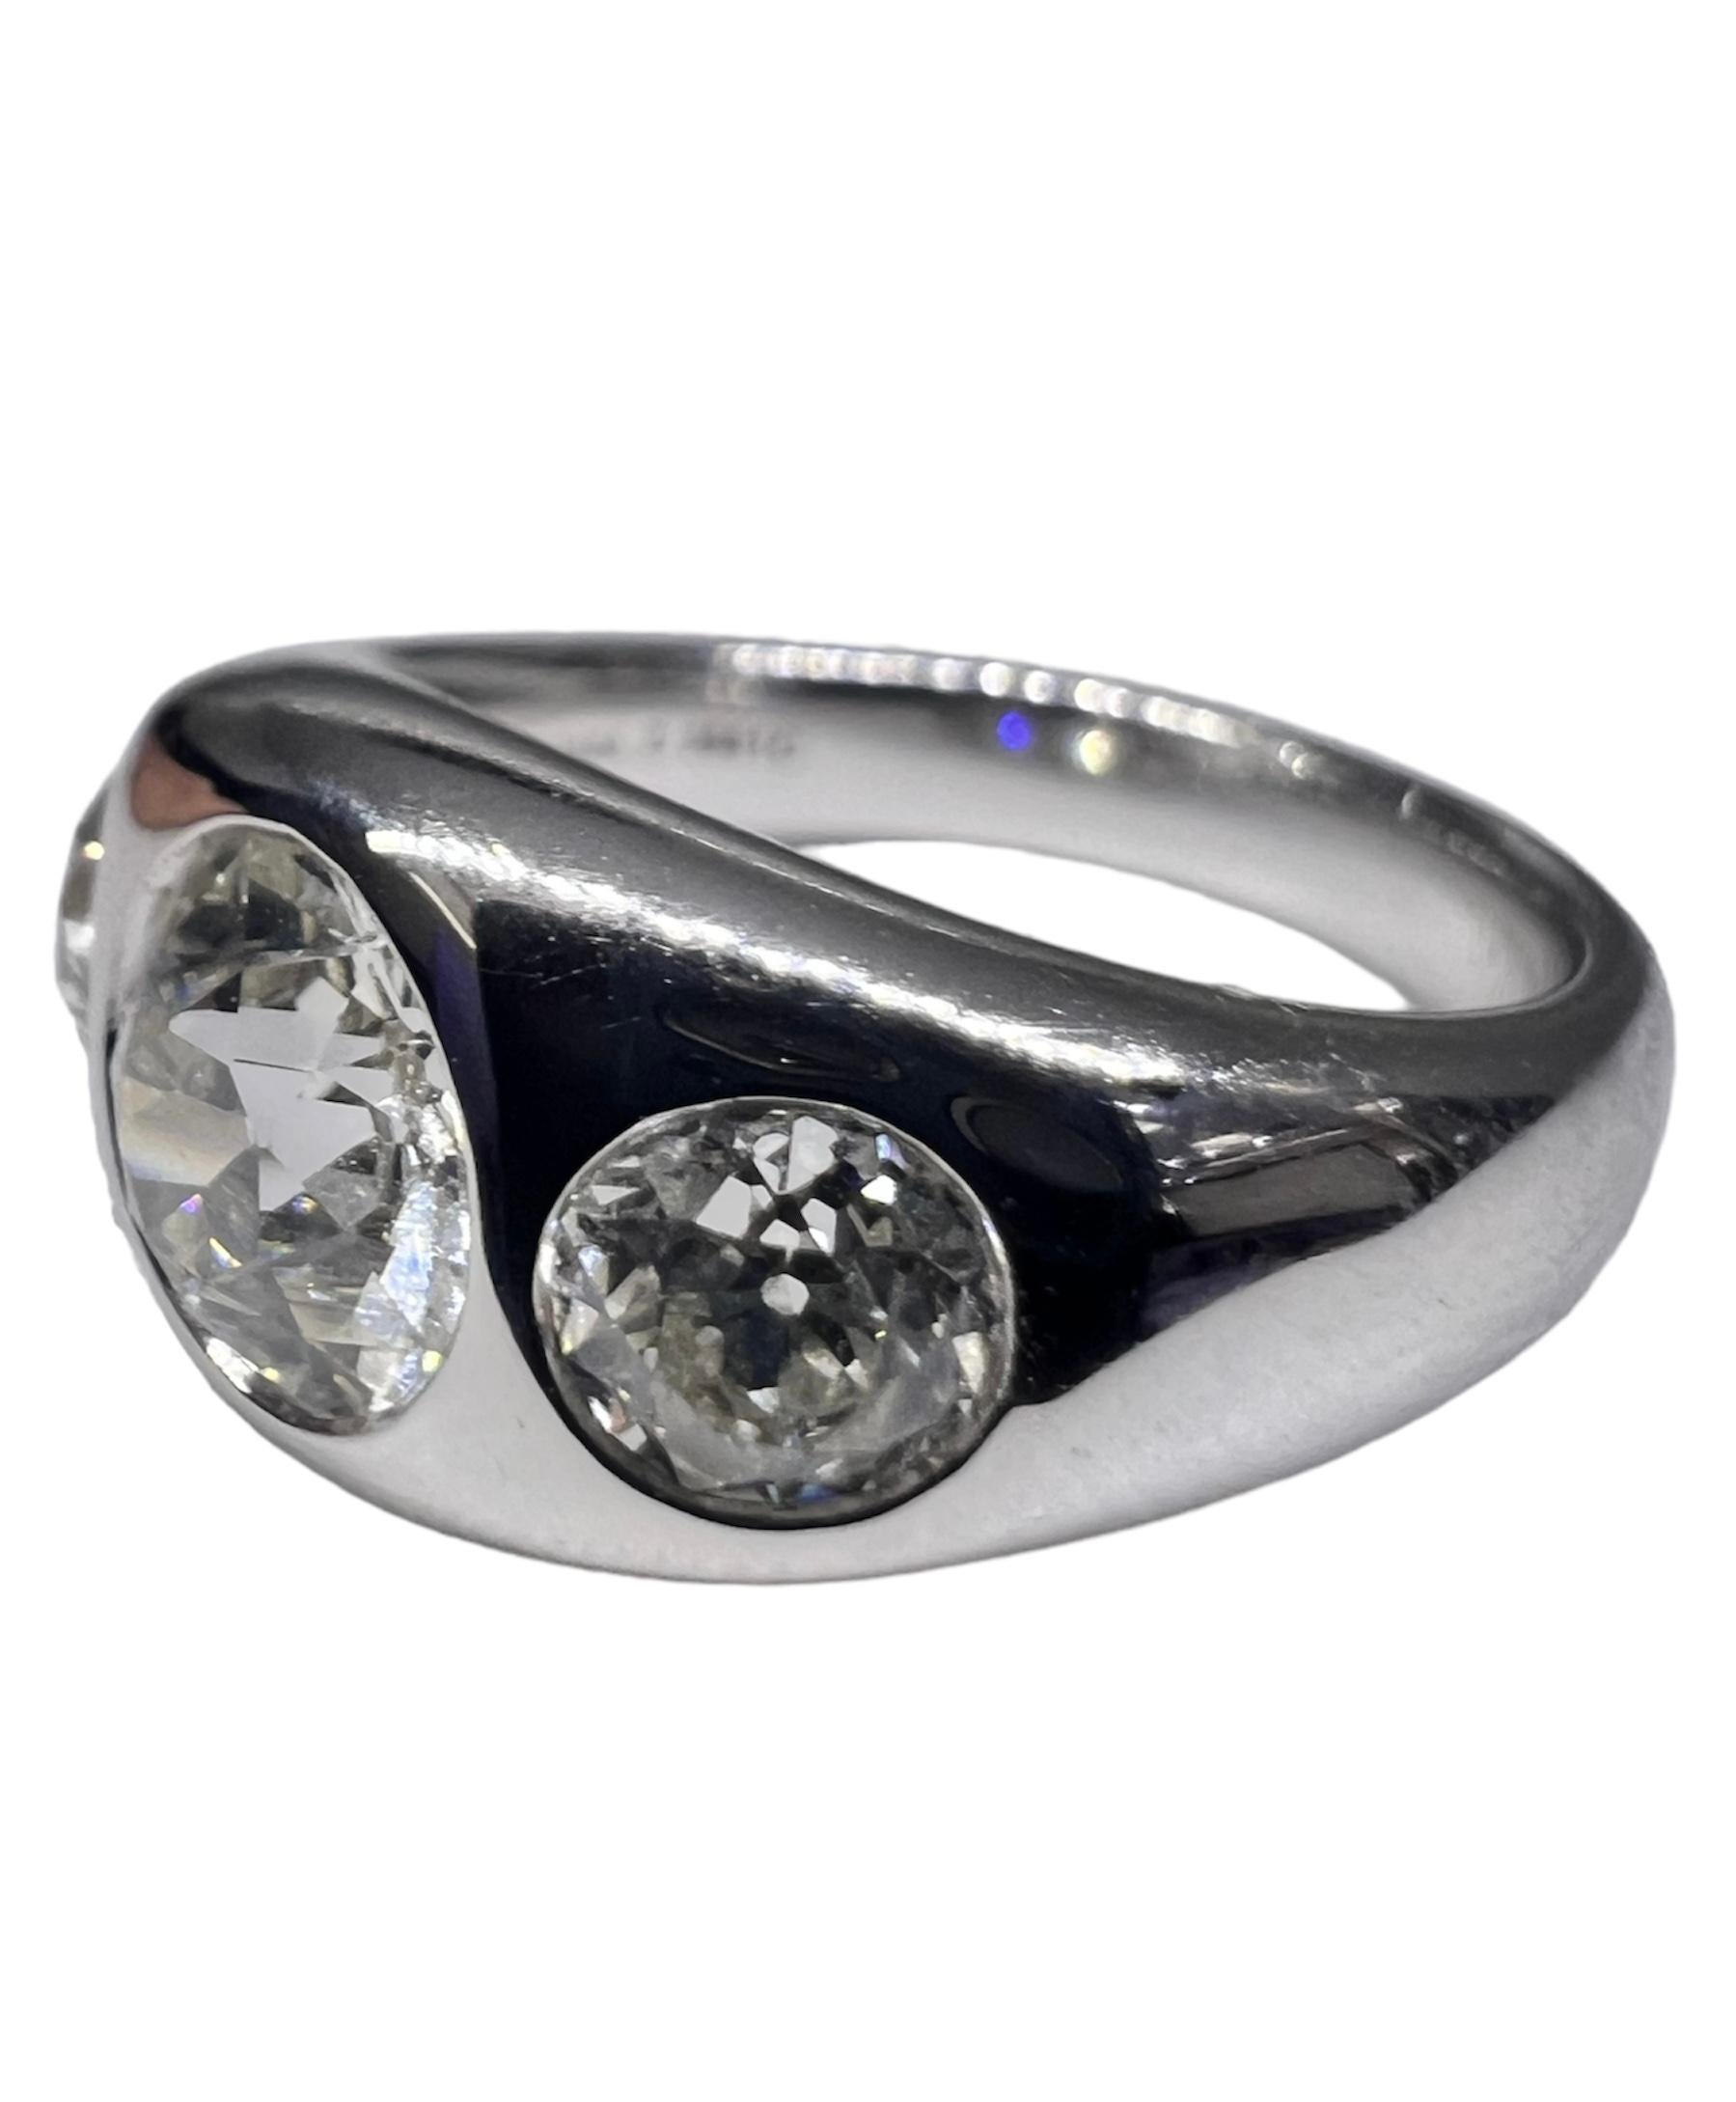 Three stone gypsy ring set in platinum by Sophia D that features a round diamond center stone that weighs 1.39 carats accentuated with two round diamonds on the side that weighs 0.50 carat and 0.46 carat.

Sophia D by Joseph Dardashti LTD has been